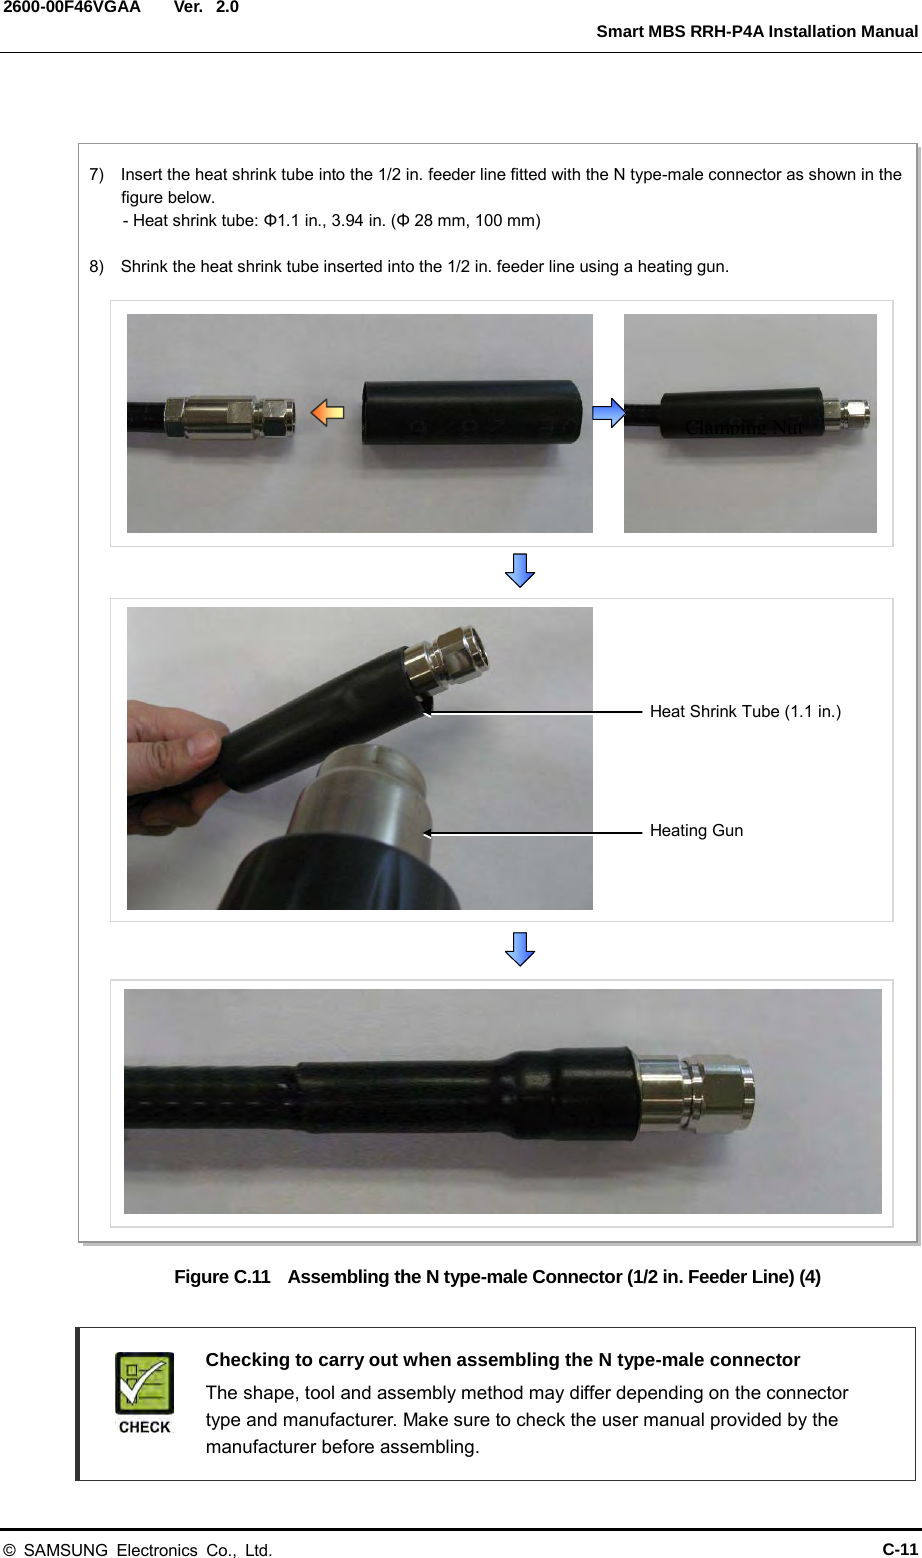  Ver.   Smart MBS RRH-P4A Installation Manual 2600-00F46VGAA 2.0  Figure C.11  Assembling the N type-male Connector (1/2 in. Feeder Line) (4)   Checking to carry out when assembling the N type-male connector  The shape, tool and assembly method may differ depending on the connector type and manufacturer. Make sure to check the user manual provided by the manufacturer before assembling. Clamping Nut 7)  Insert the heat shrink tube into the 1/2 in. feeder line fitted with the N type-male connector as shown in the figure below.     - Heat shrink tube: Φ1.1 in., 3.94 in. (Φ 28 mm, 100 mm)  8)  Shrink the heat shrink tube inserted into the 1/2 in. feeder line using a heating gun. Heating Gun Heat Shrink Tube (1.1 in.) © SAMSUNG Electronics Co., Ltd. C-11 